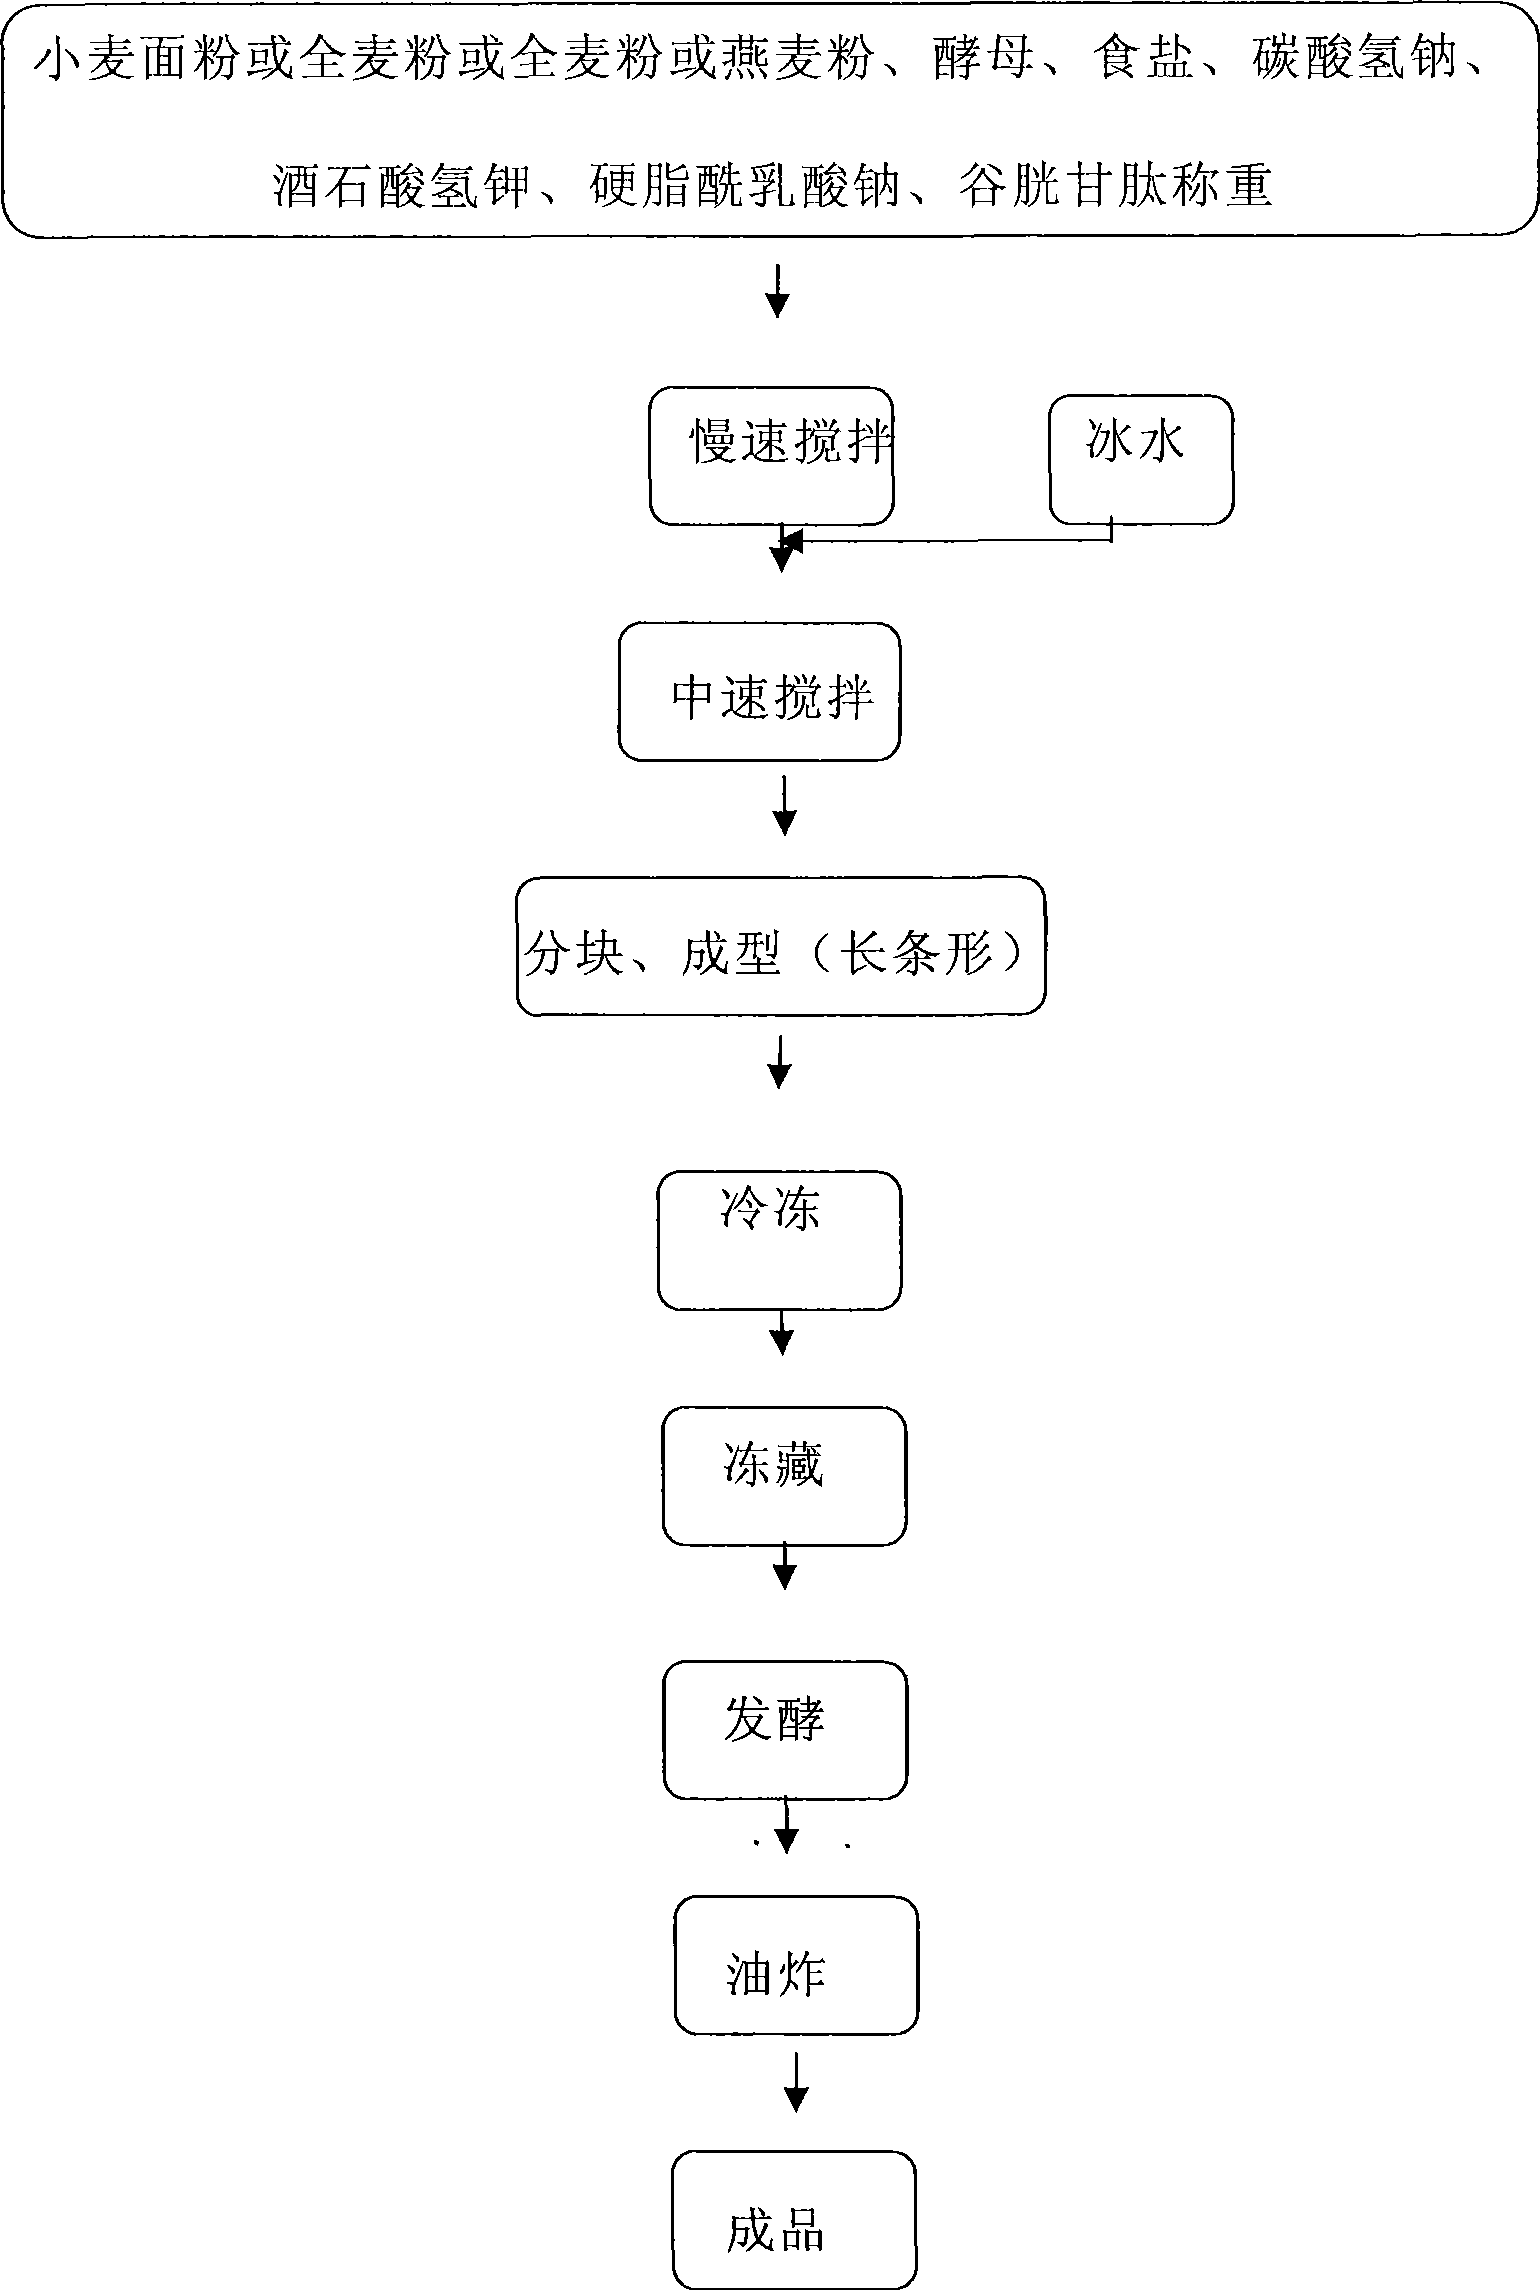 Freezing fermented deep-fried twisted dough sticks and method for producing the same